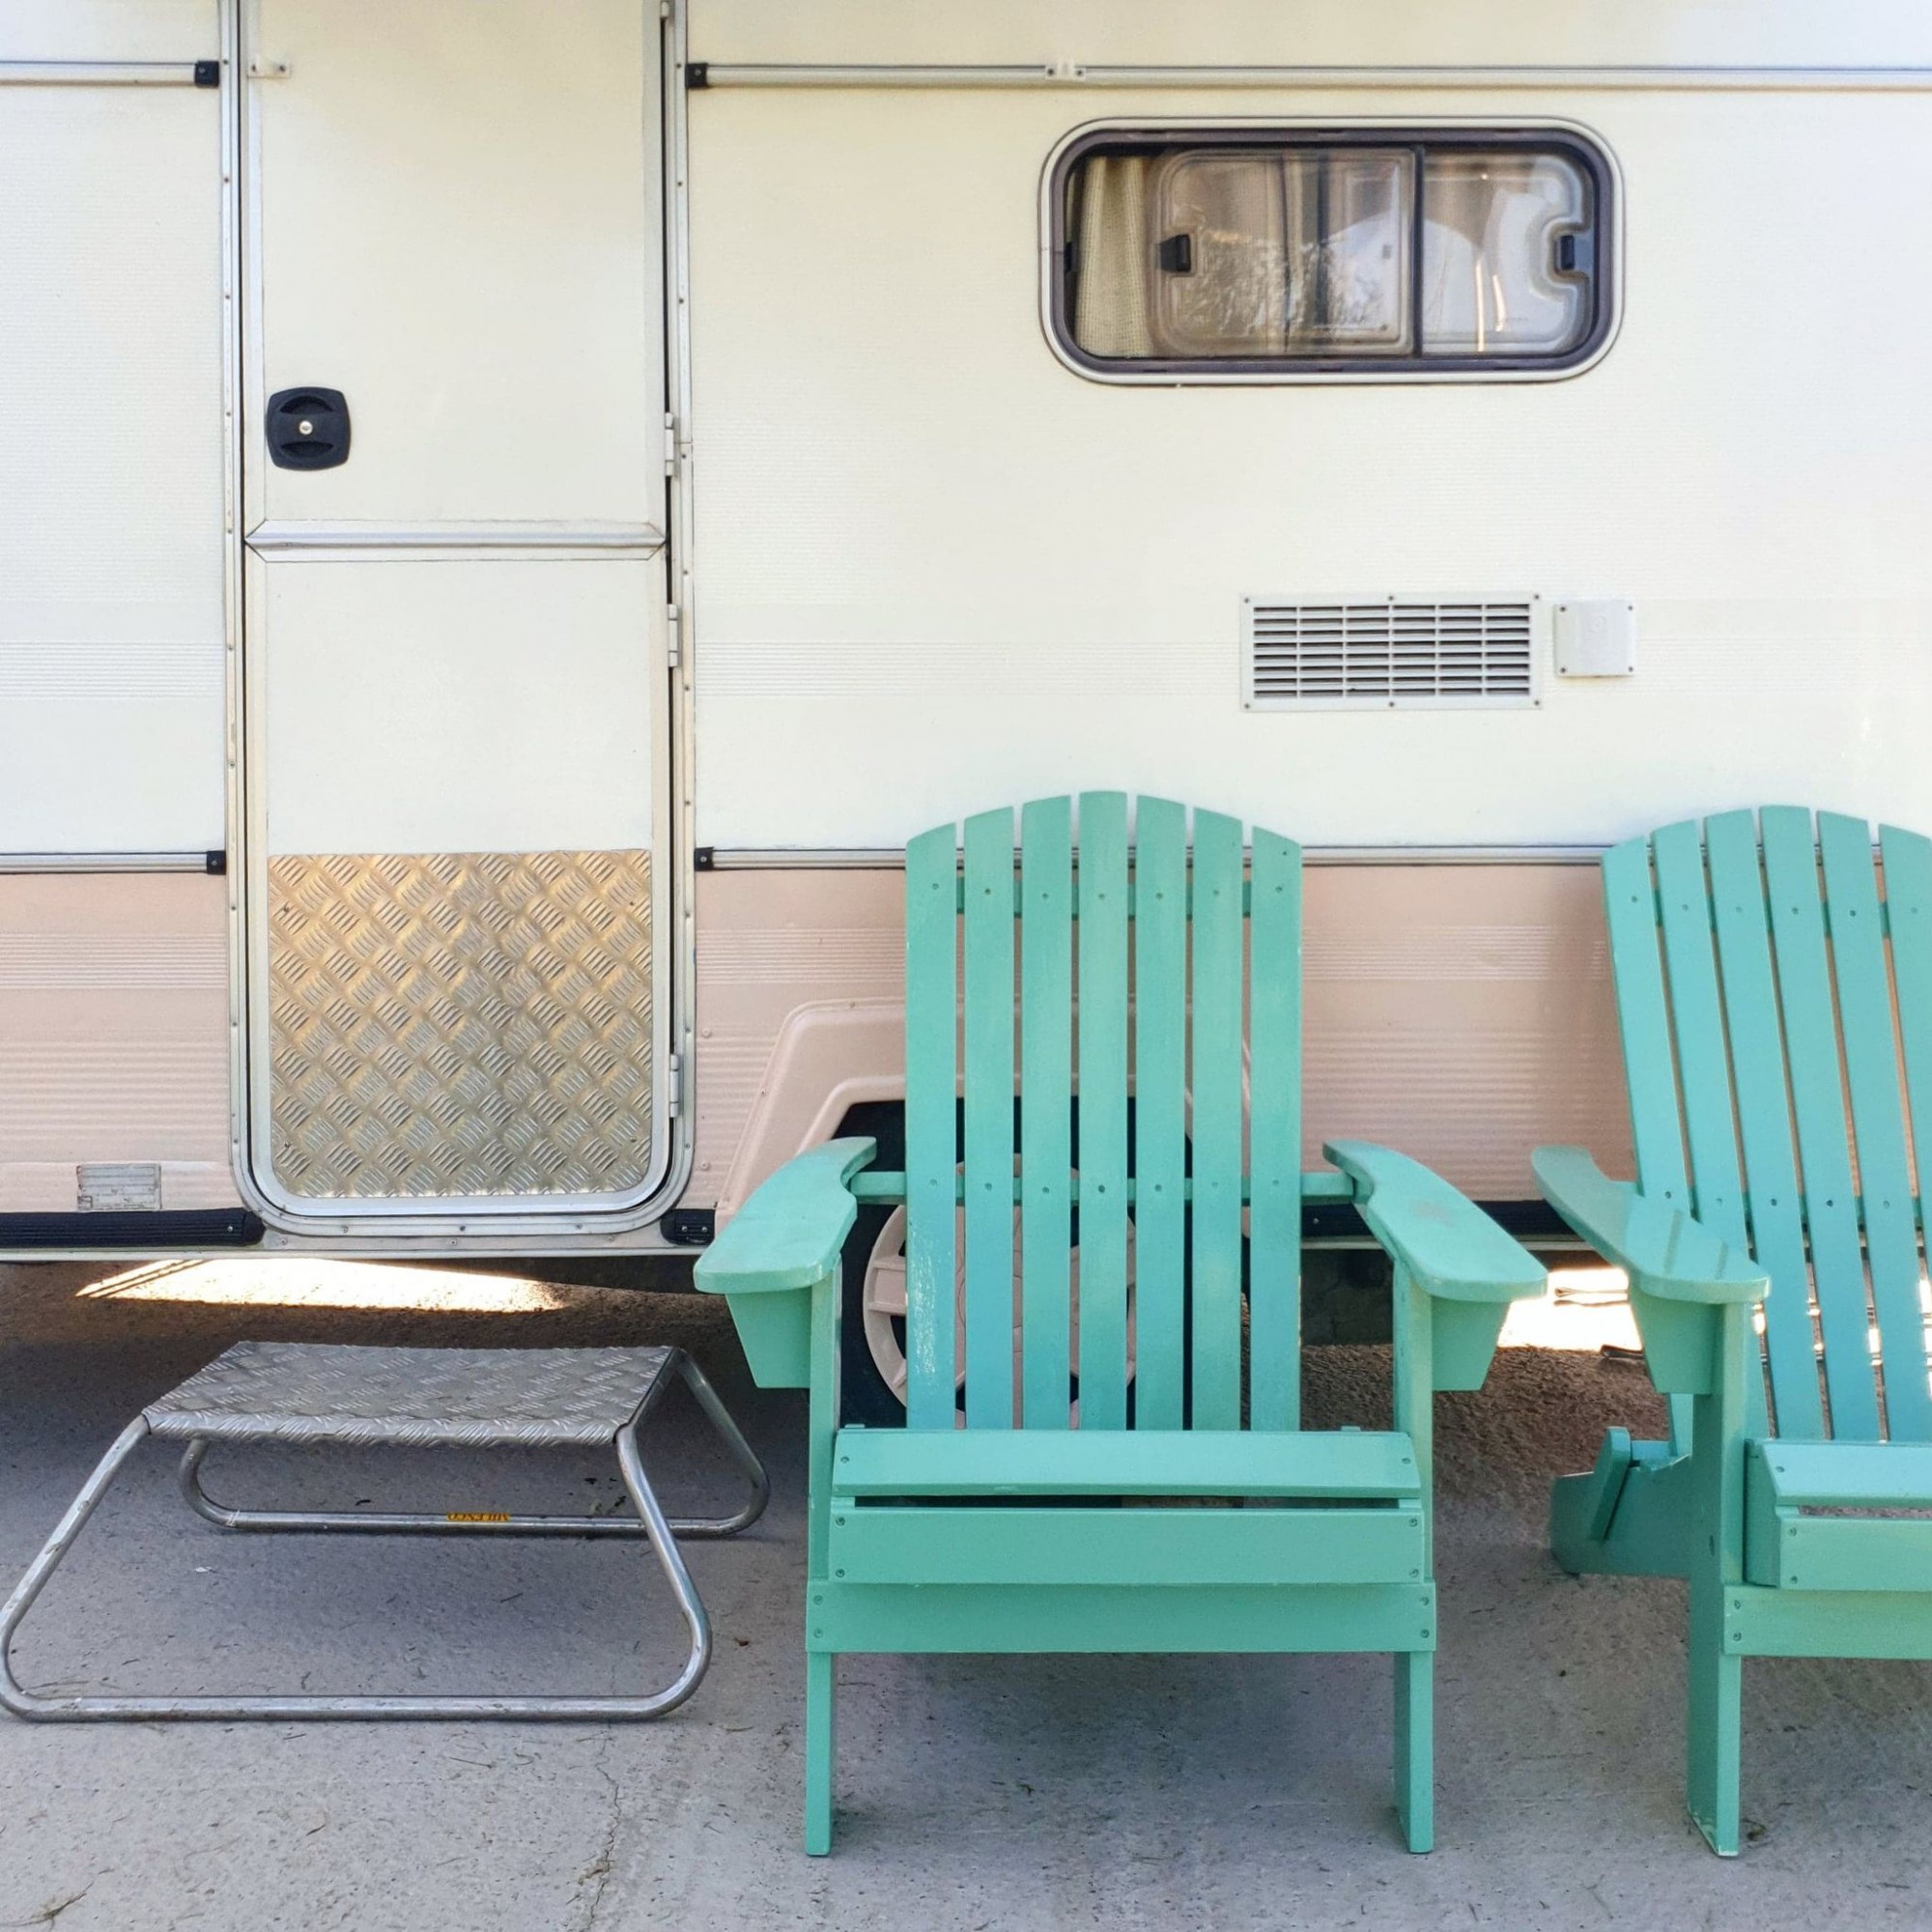 Beverly-Thrills-outside-lounge-chairs.jpg